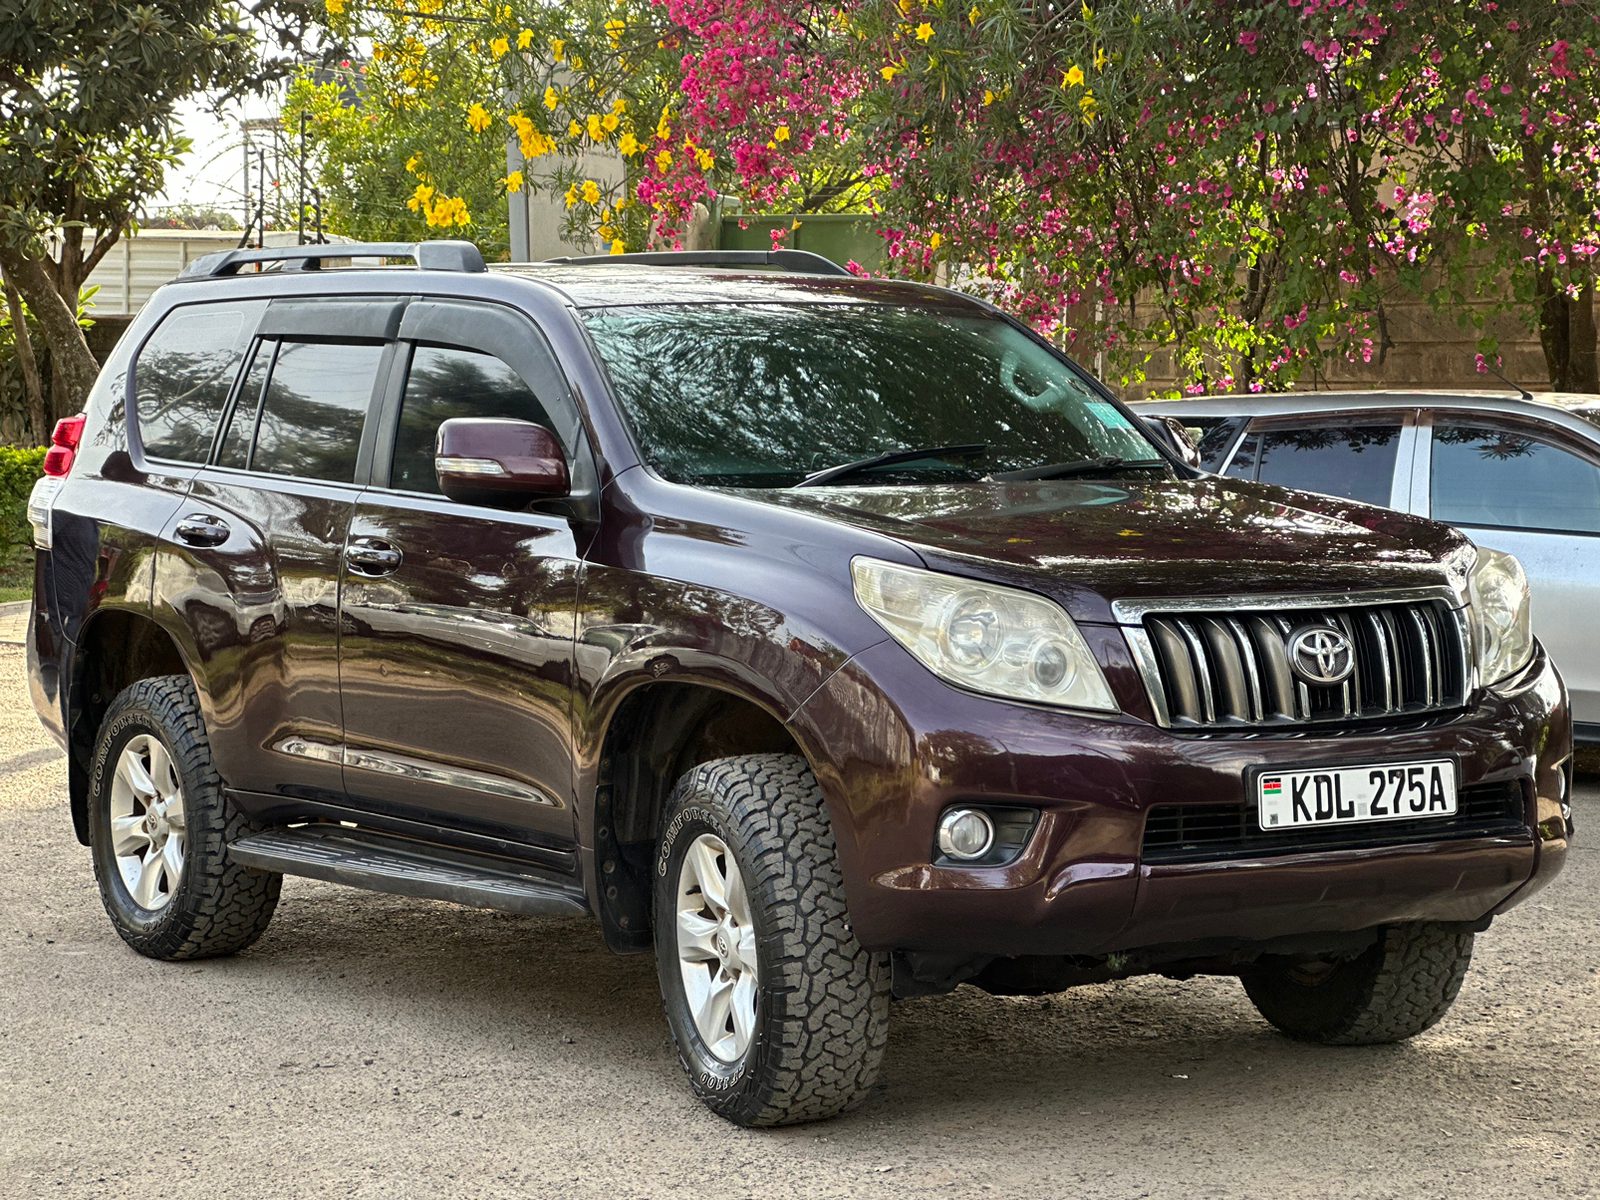 Toyota Prado KDL 3.7M ONLY DIESEL SUNROOF Cheapest! You Pay 30% Deposit Trade in OK with SUNROOF